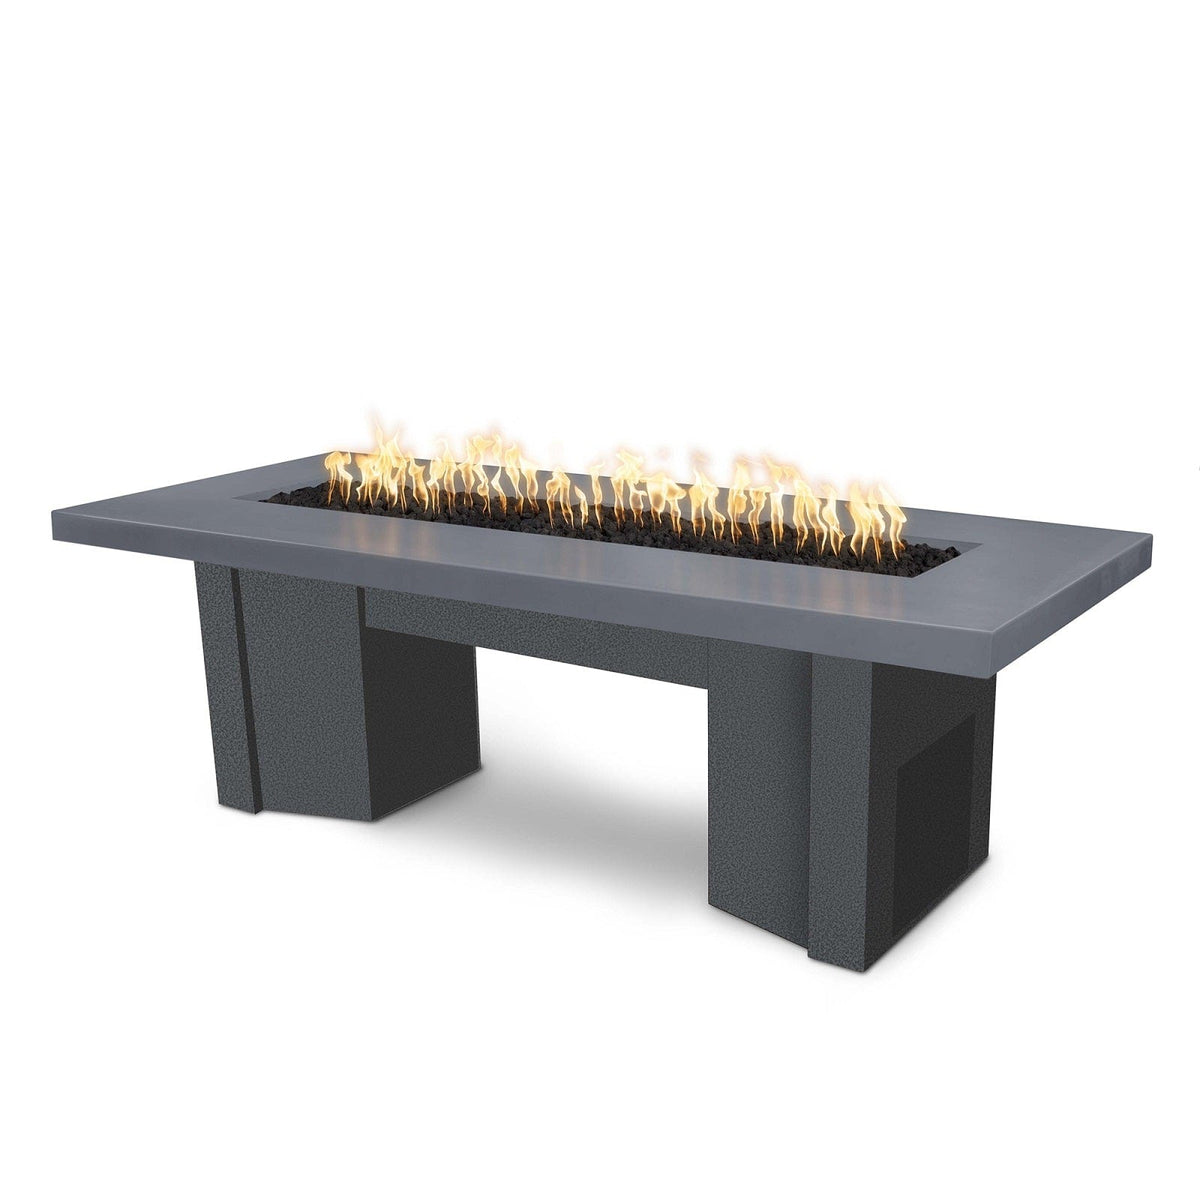 The Outdoor Plus Fire Features Gray (-GRY) / Silver Vein Powder Coated Steel (-SLV) The Outdoor Plus 60&quot; Alameda Fire Table Smooth Concrete in Natural Gas - 12V Electronic Ignition / OPT-ALMGFRC60E12V-NG